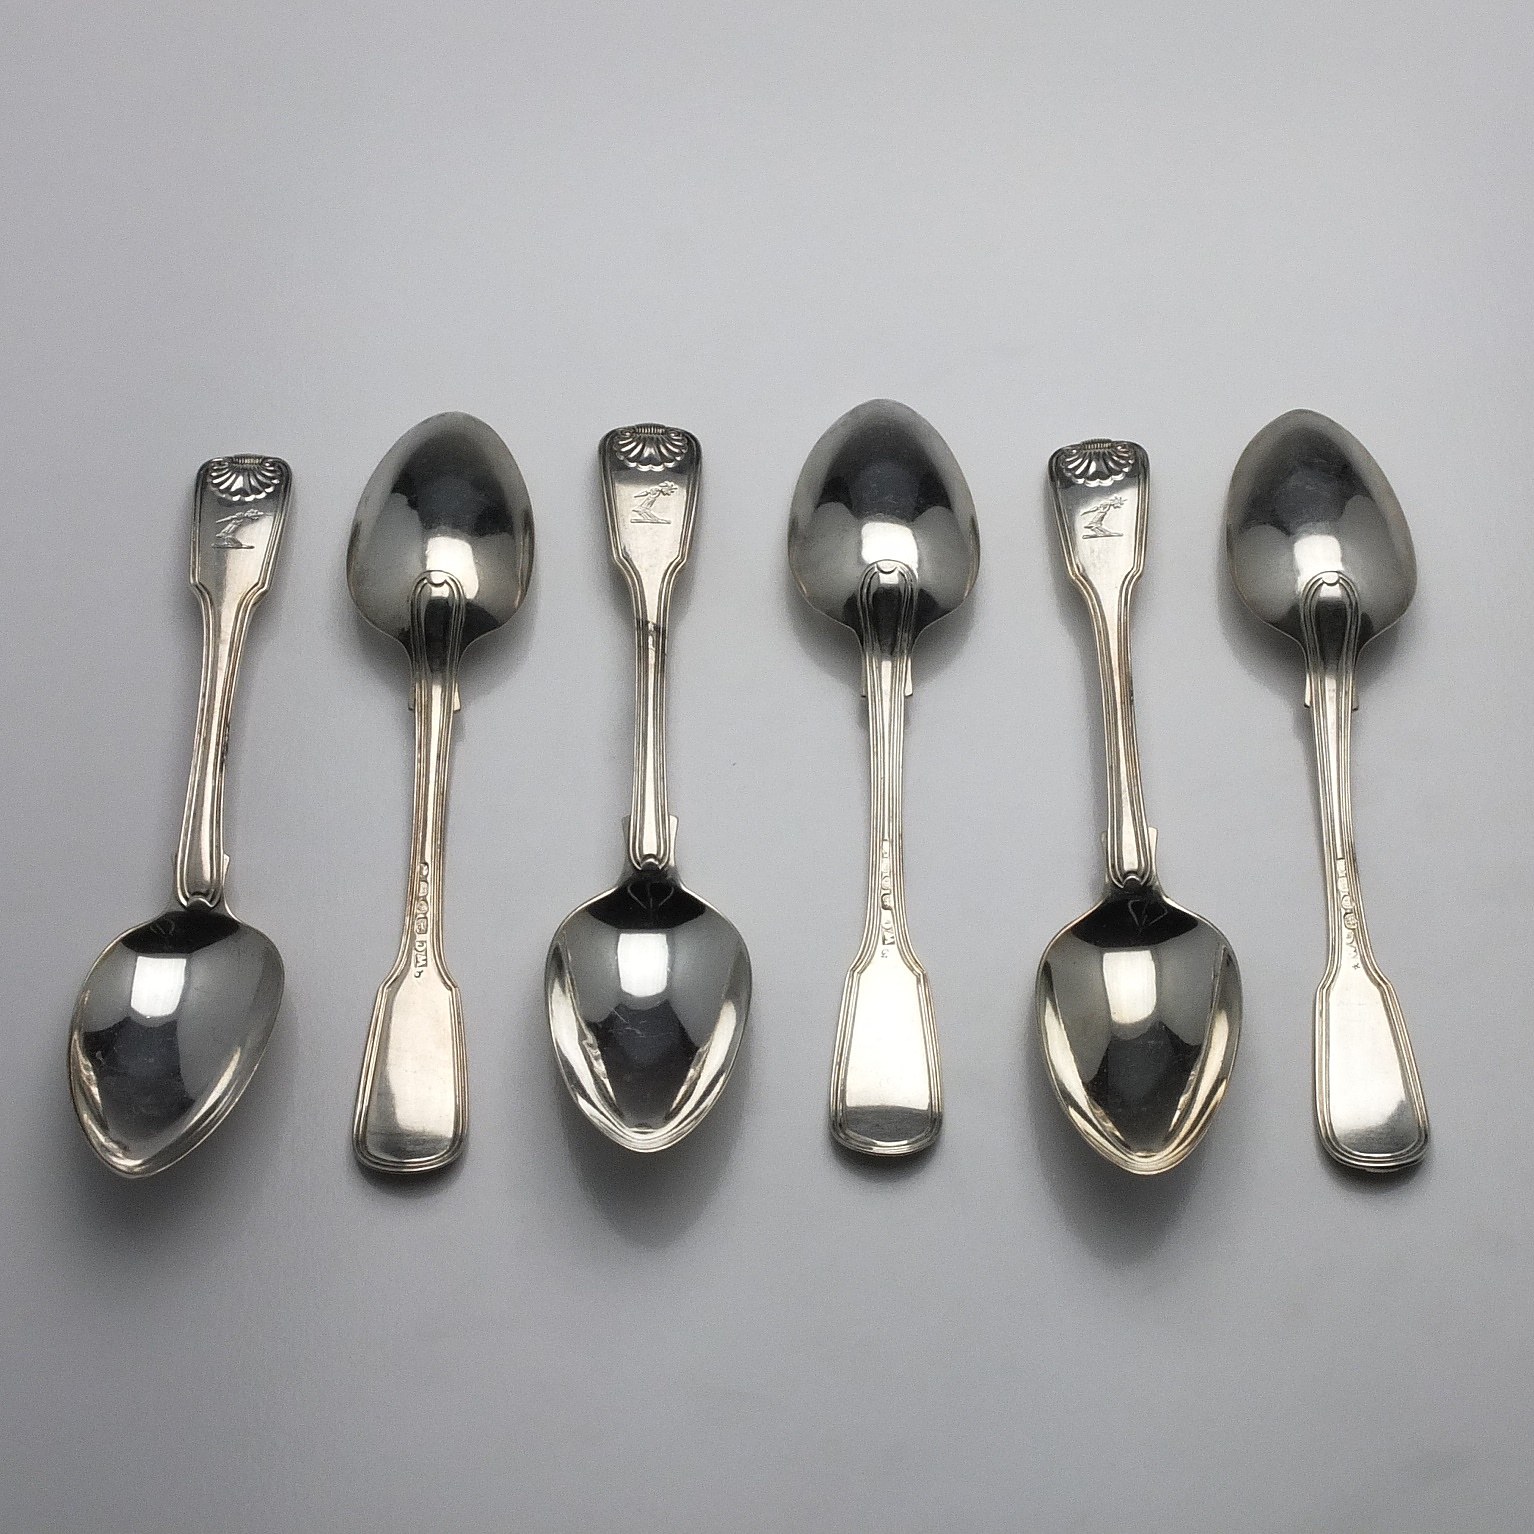 'Six Crested Sterling Silver Spoons William Chawner II London 1831 and Richard Poulden London 1819'